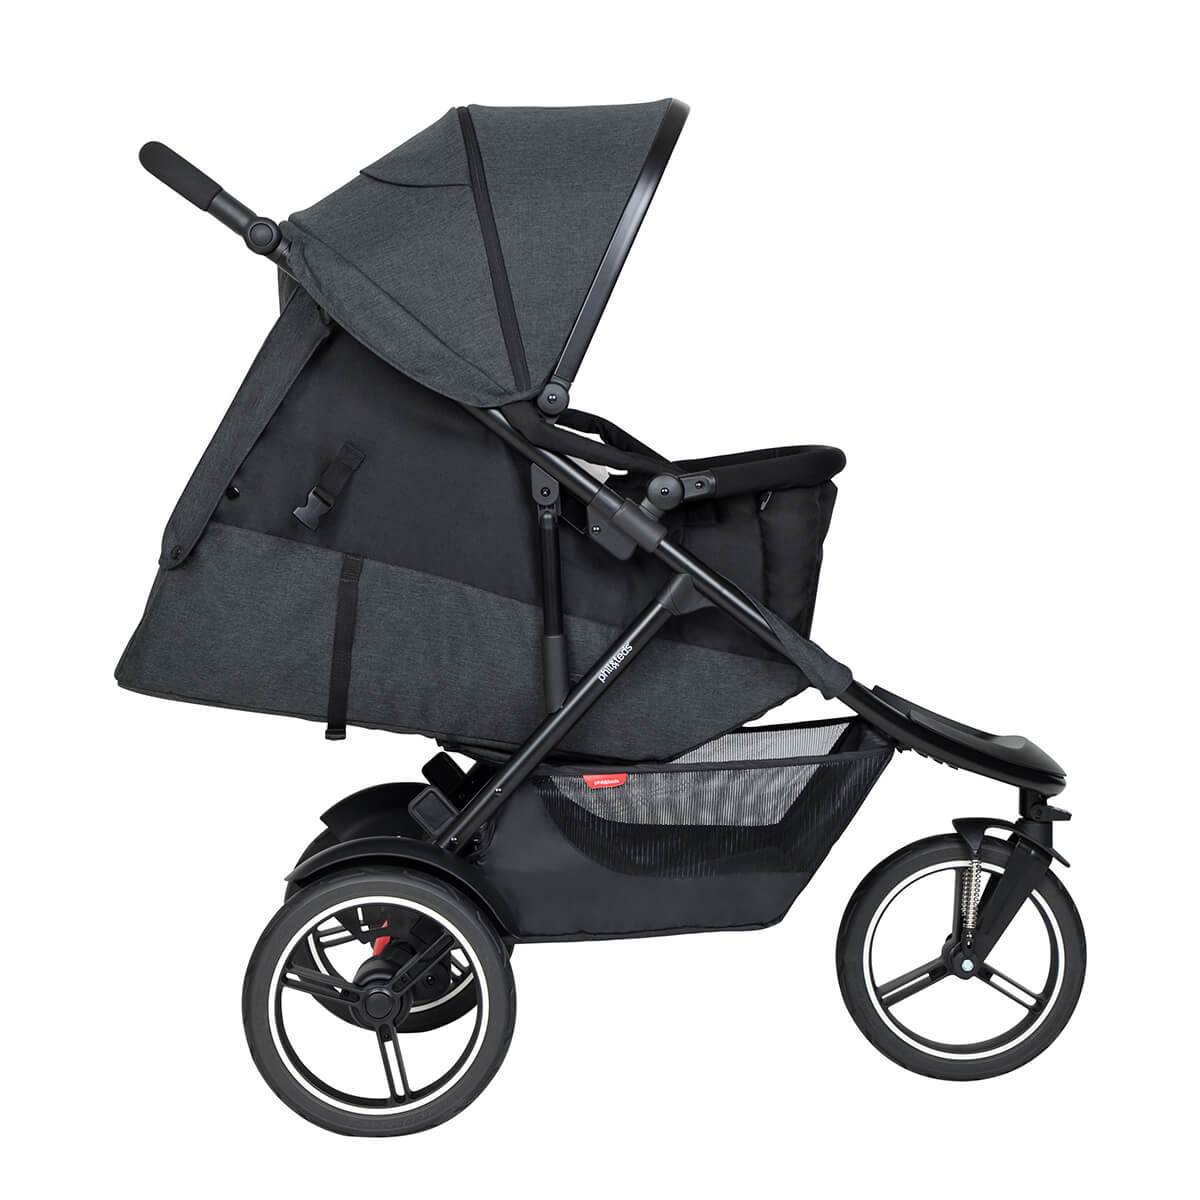 dash pram with lightweight carrycot style sleeper - philandteds dash and cocoon bundle